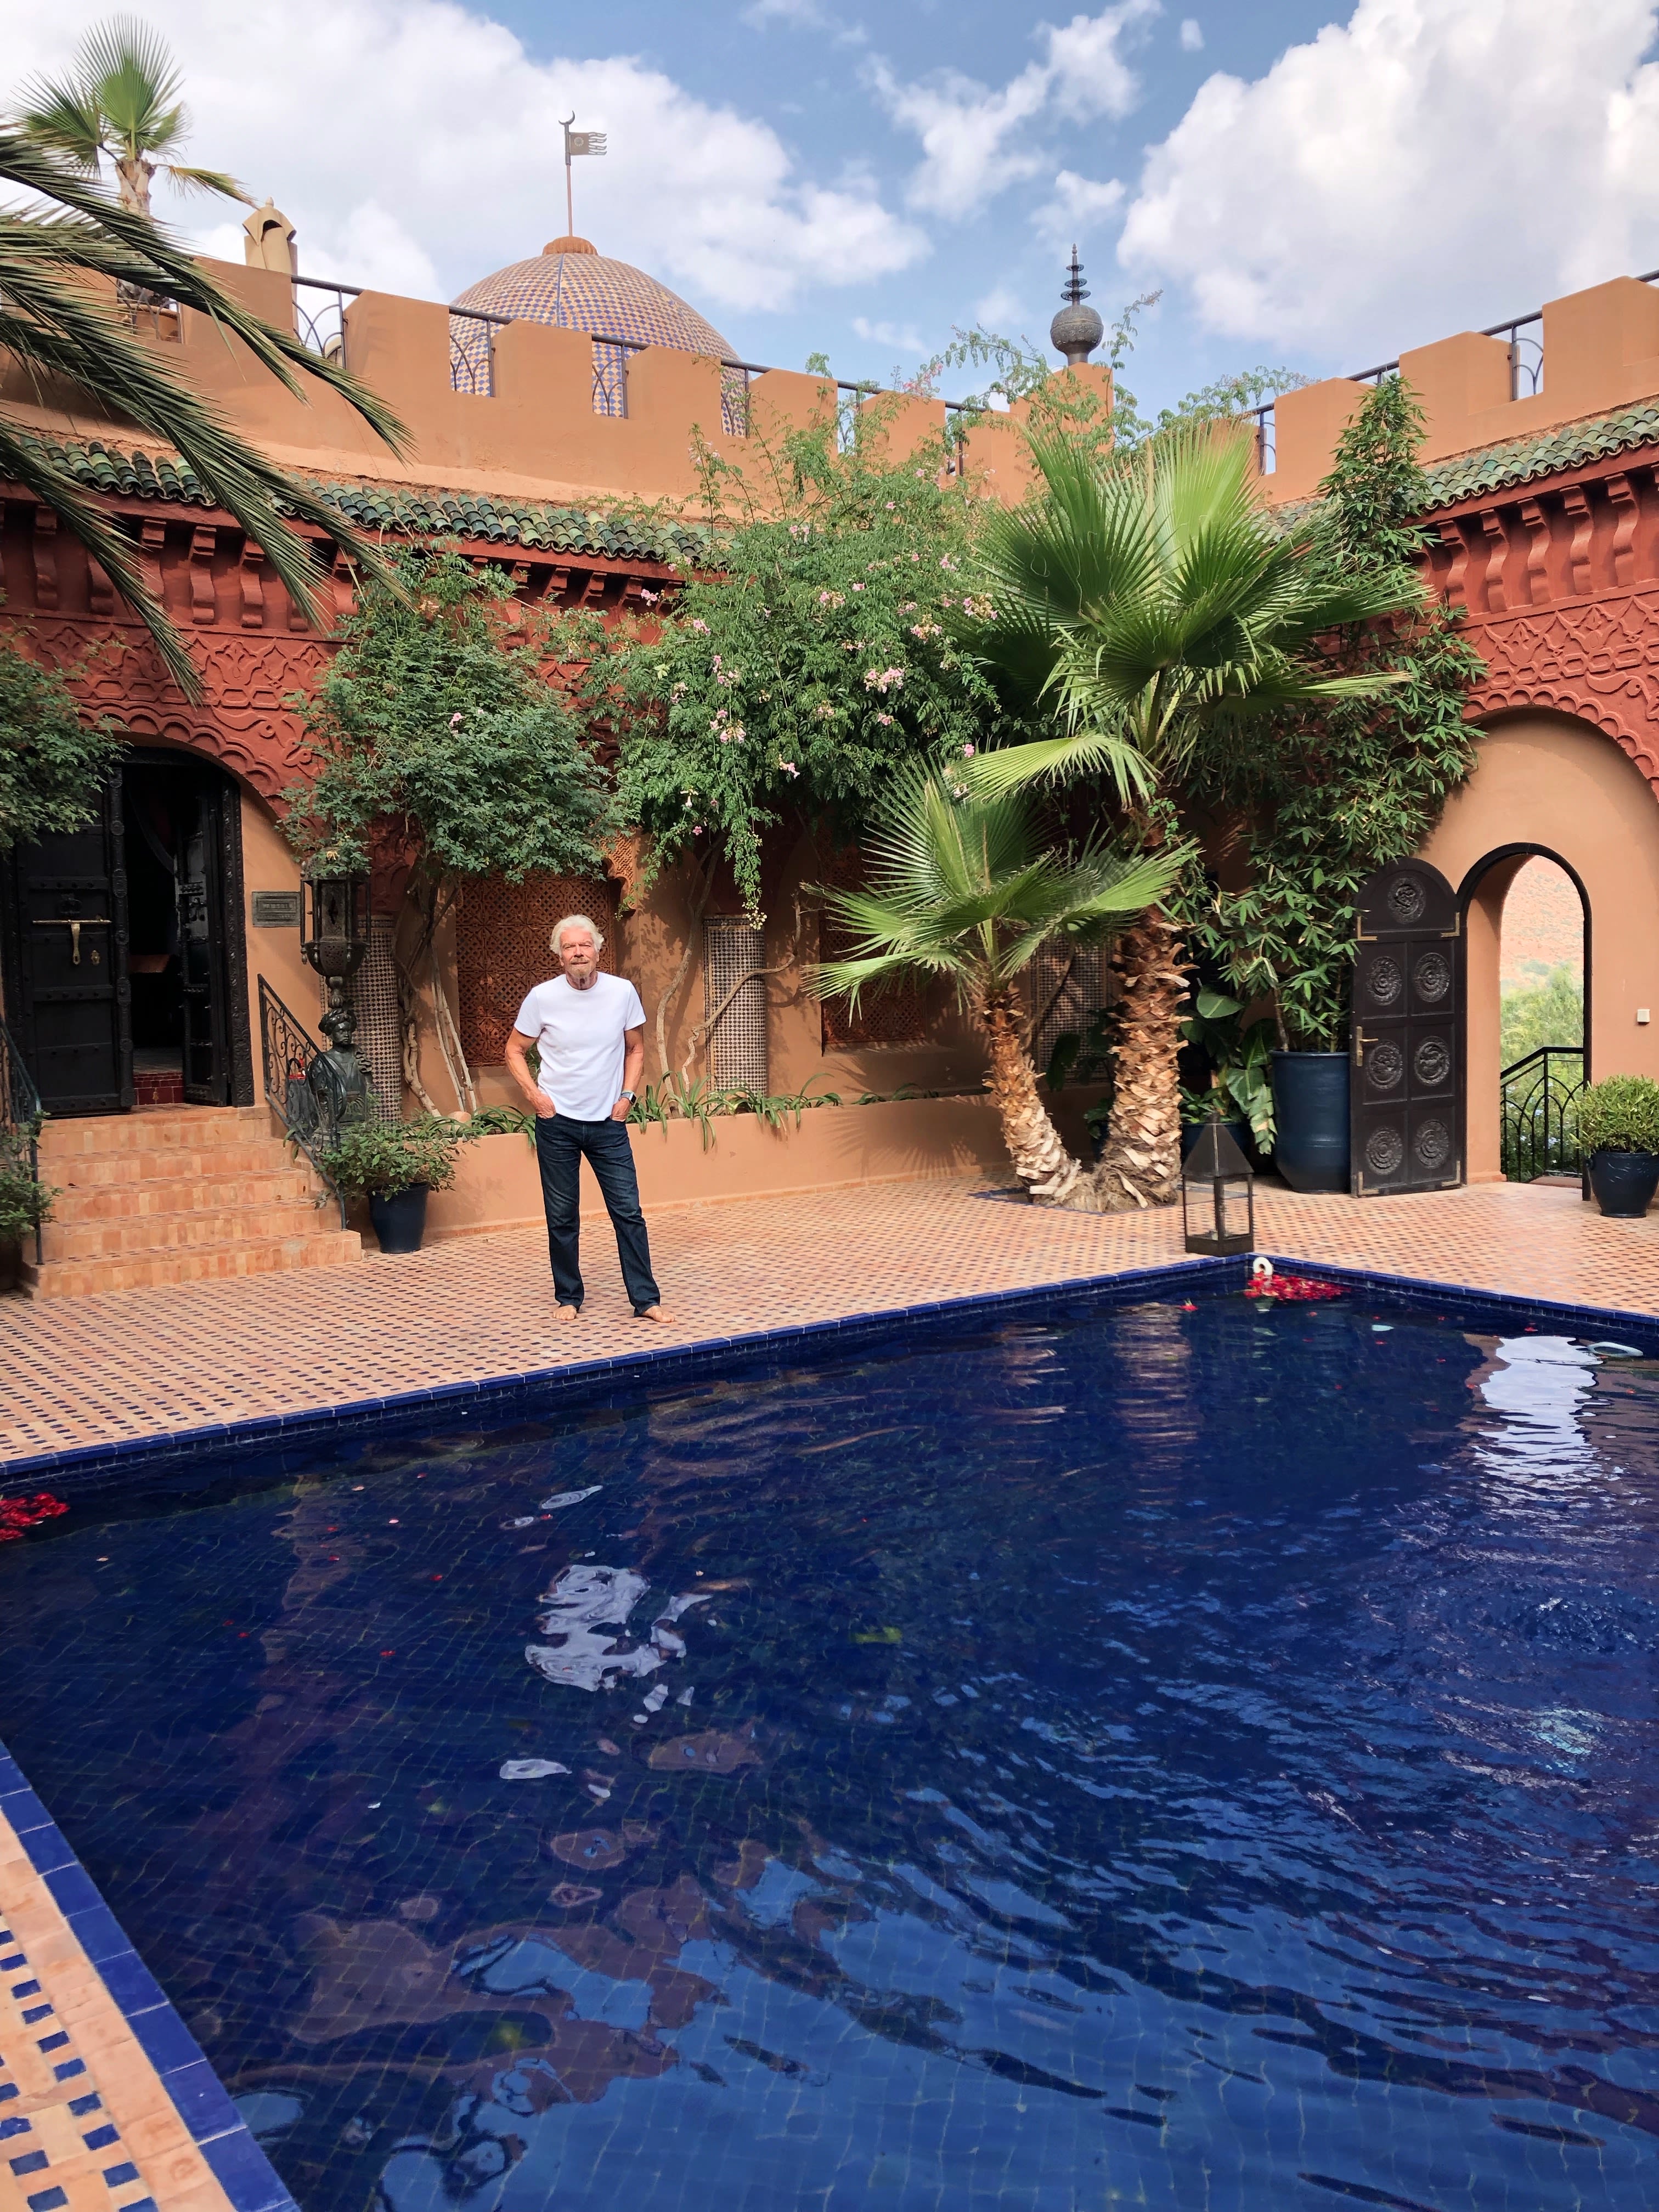 Richard Branson smiles from across a courtyard at Kasbah Tamadot in Morocco